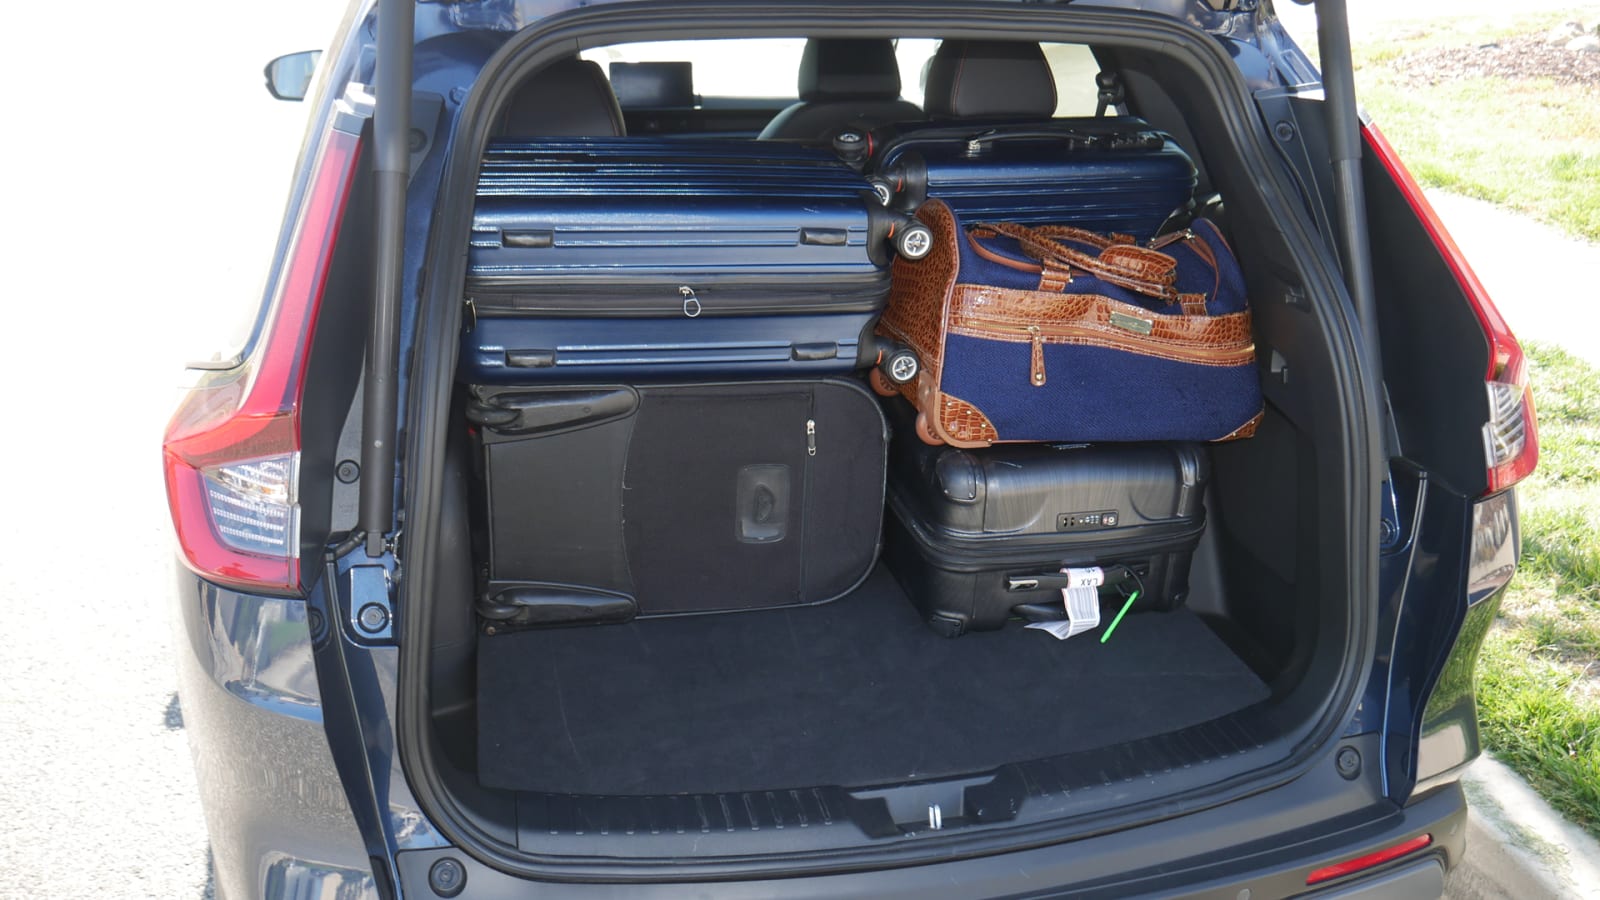 CR V all the bags Honda CR-V Luggage Test: How much cargo space?